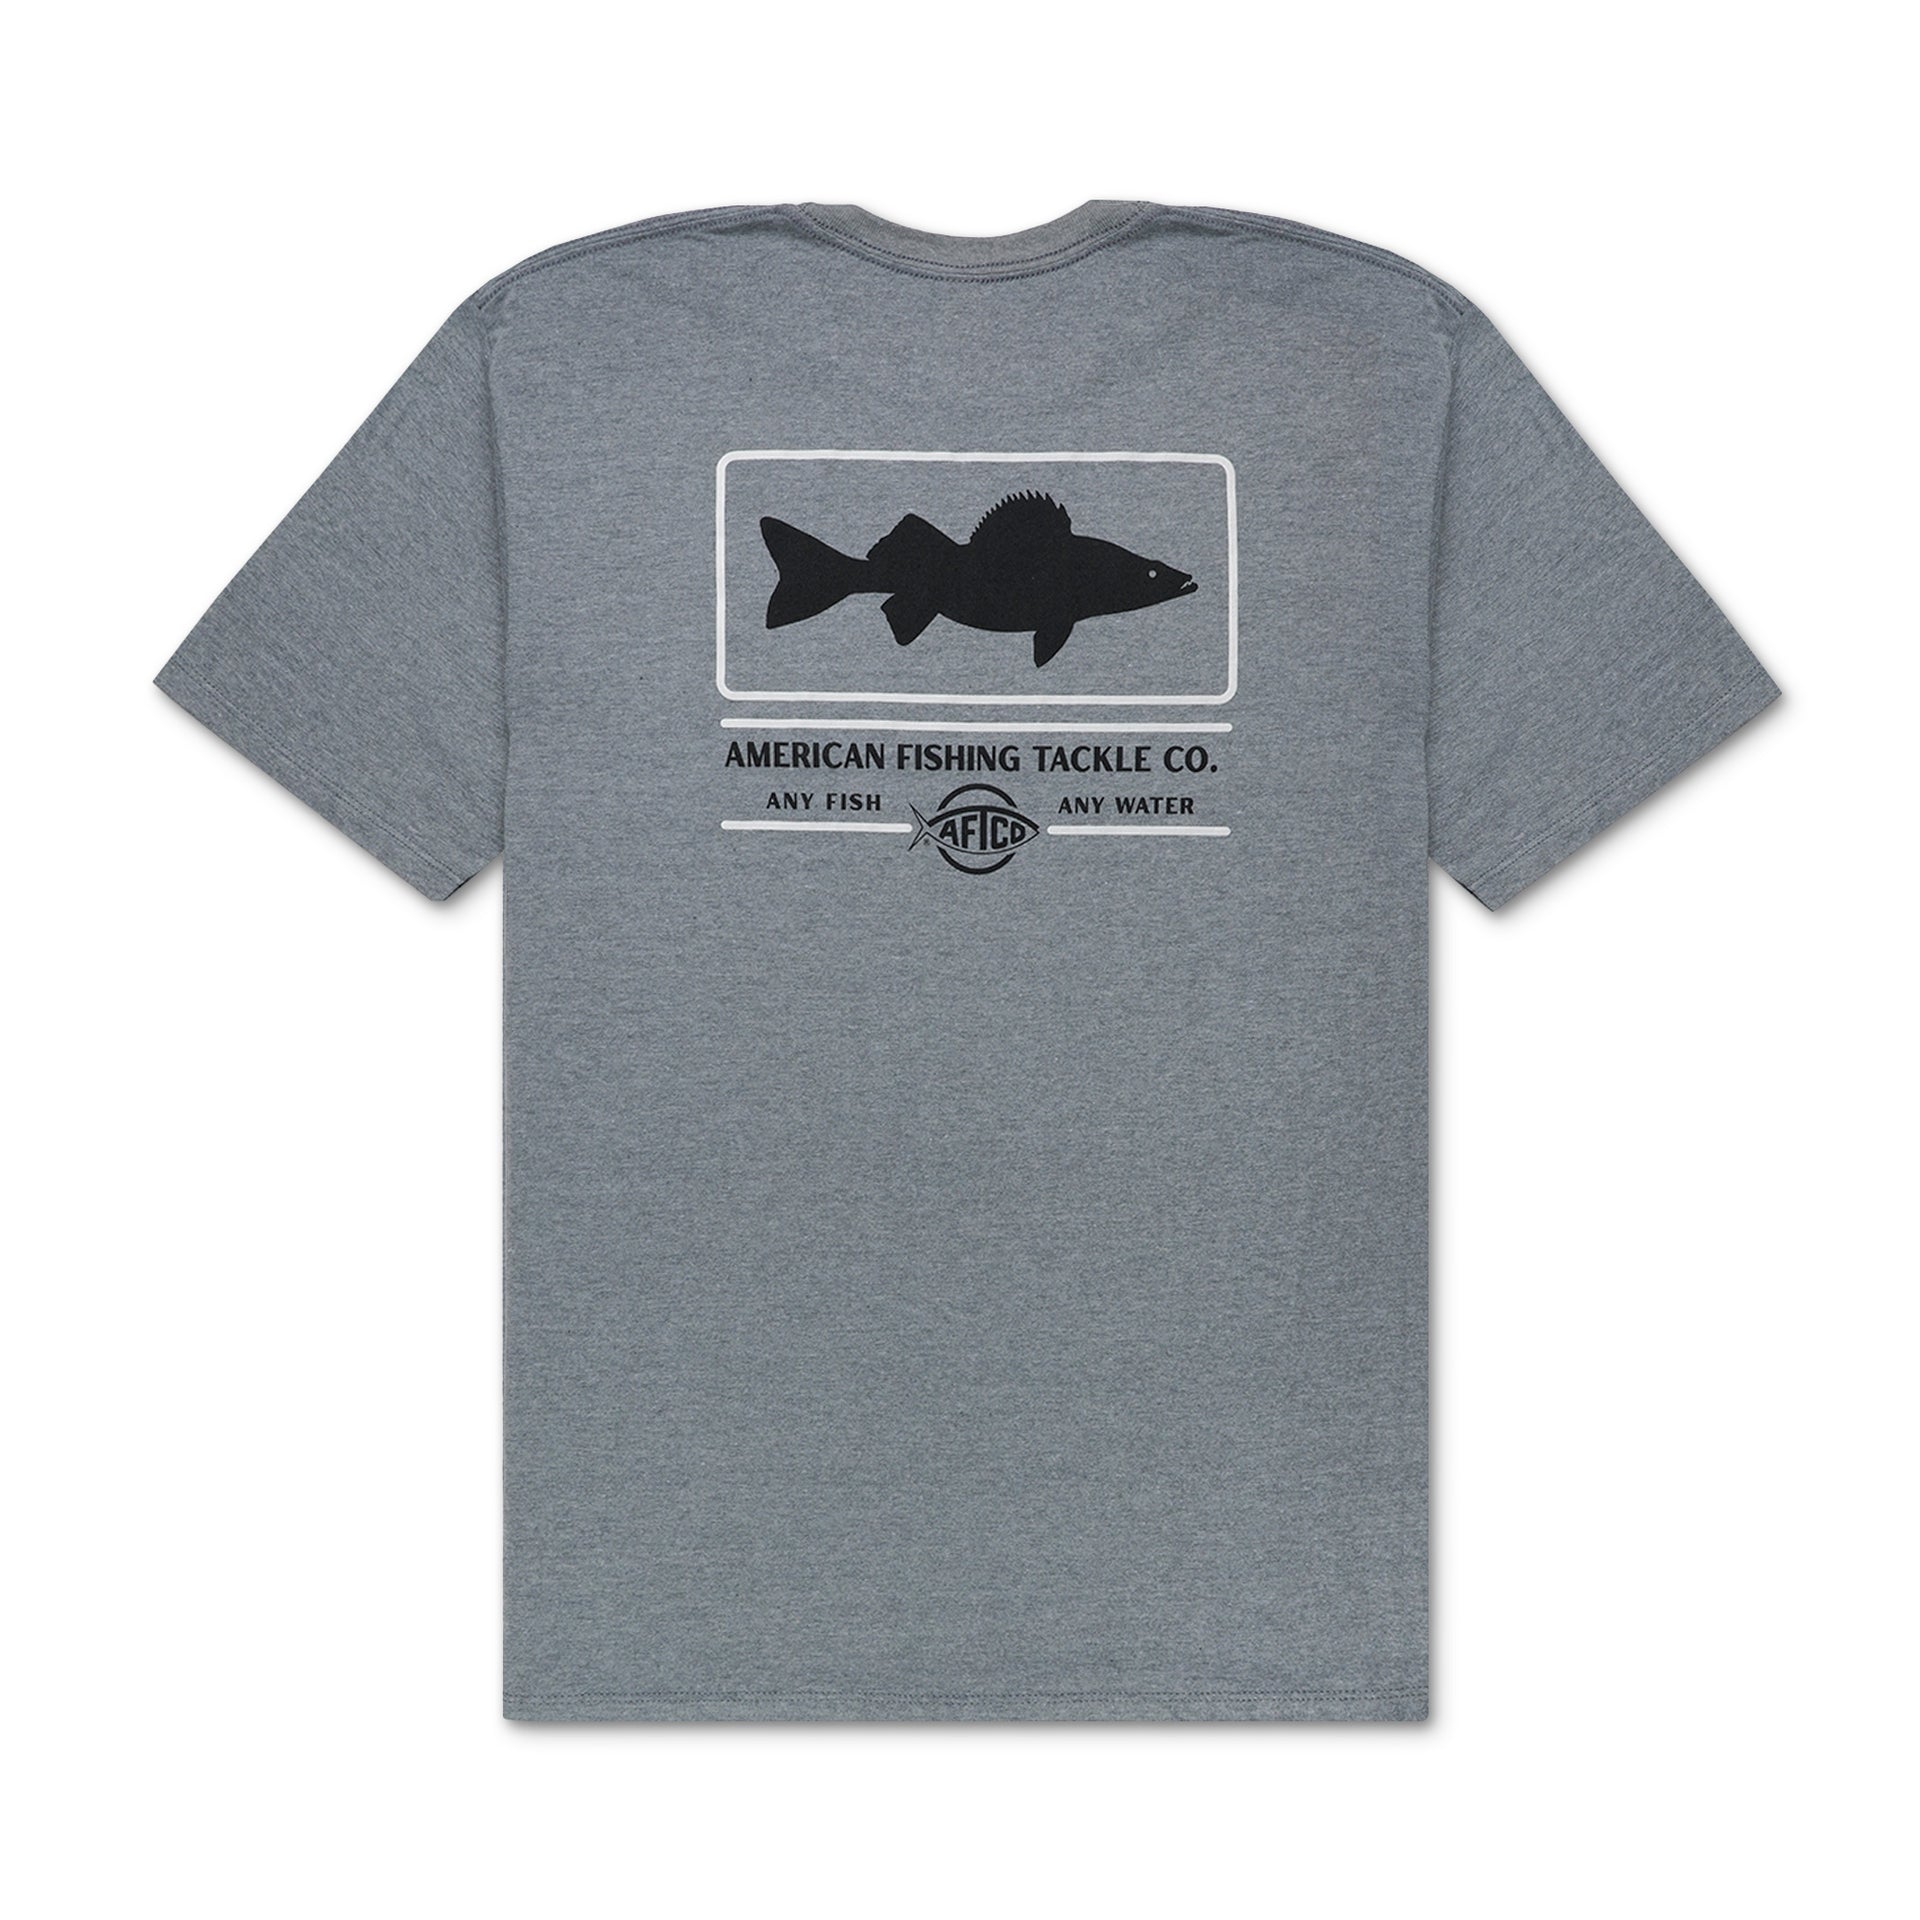 AFTCO Men's Wally Dinger SS T-Shirt - Graphite Heather - L